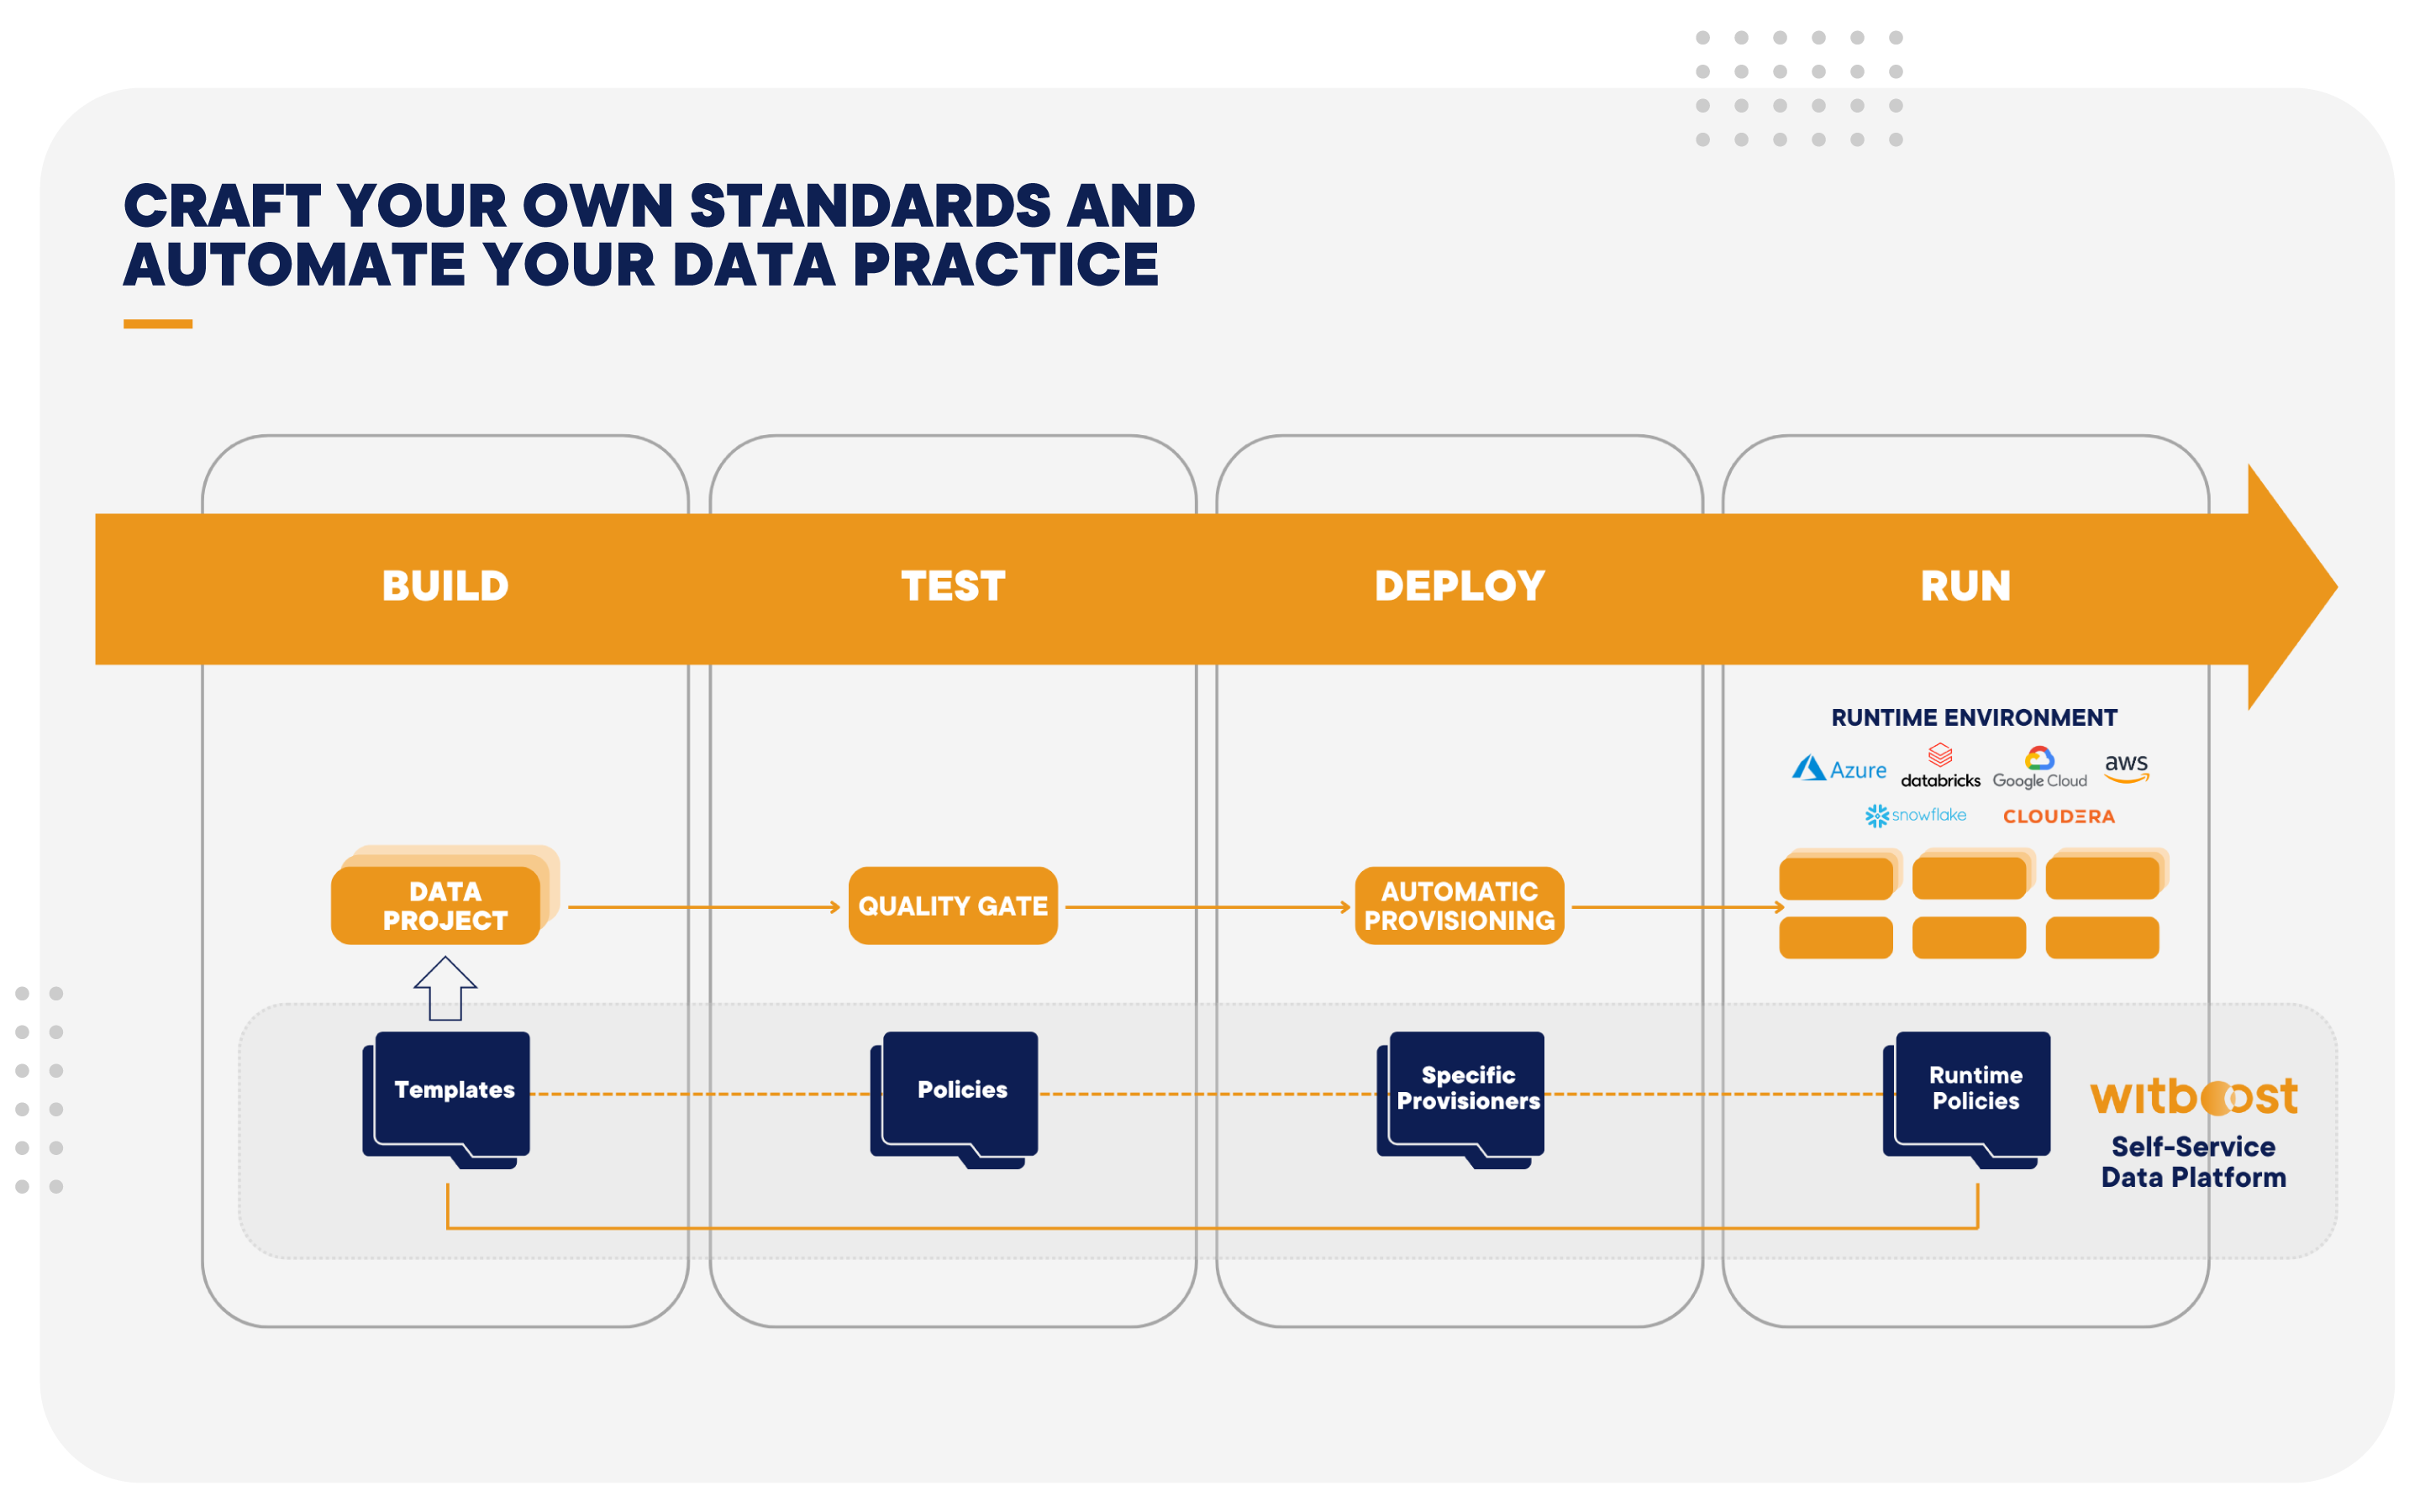 CRAFT YOUR OWN STANDARDS AND AUTOMATE YOUR DATA PRACTICE